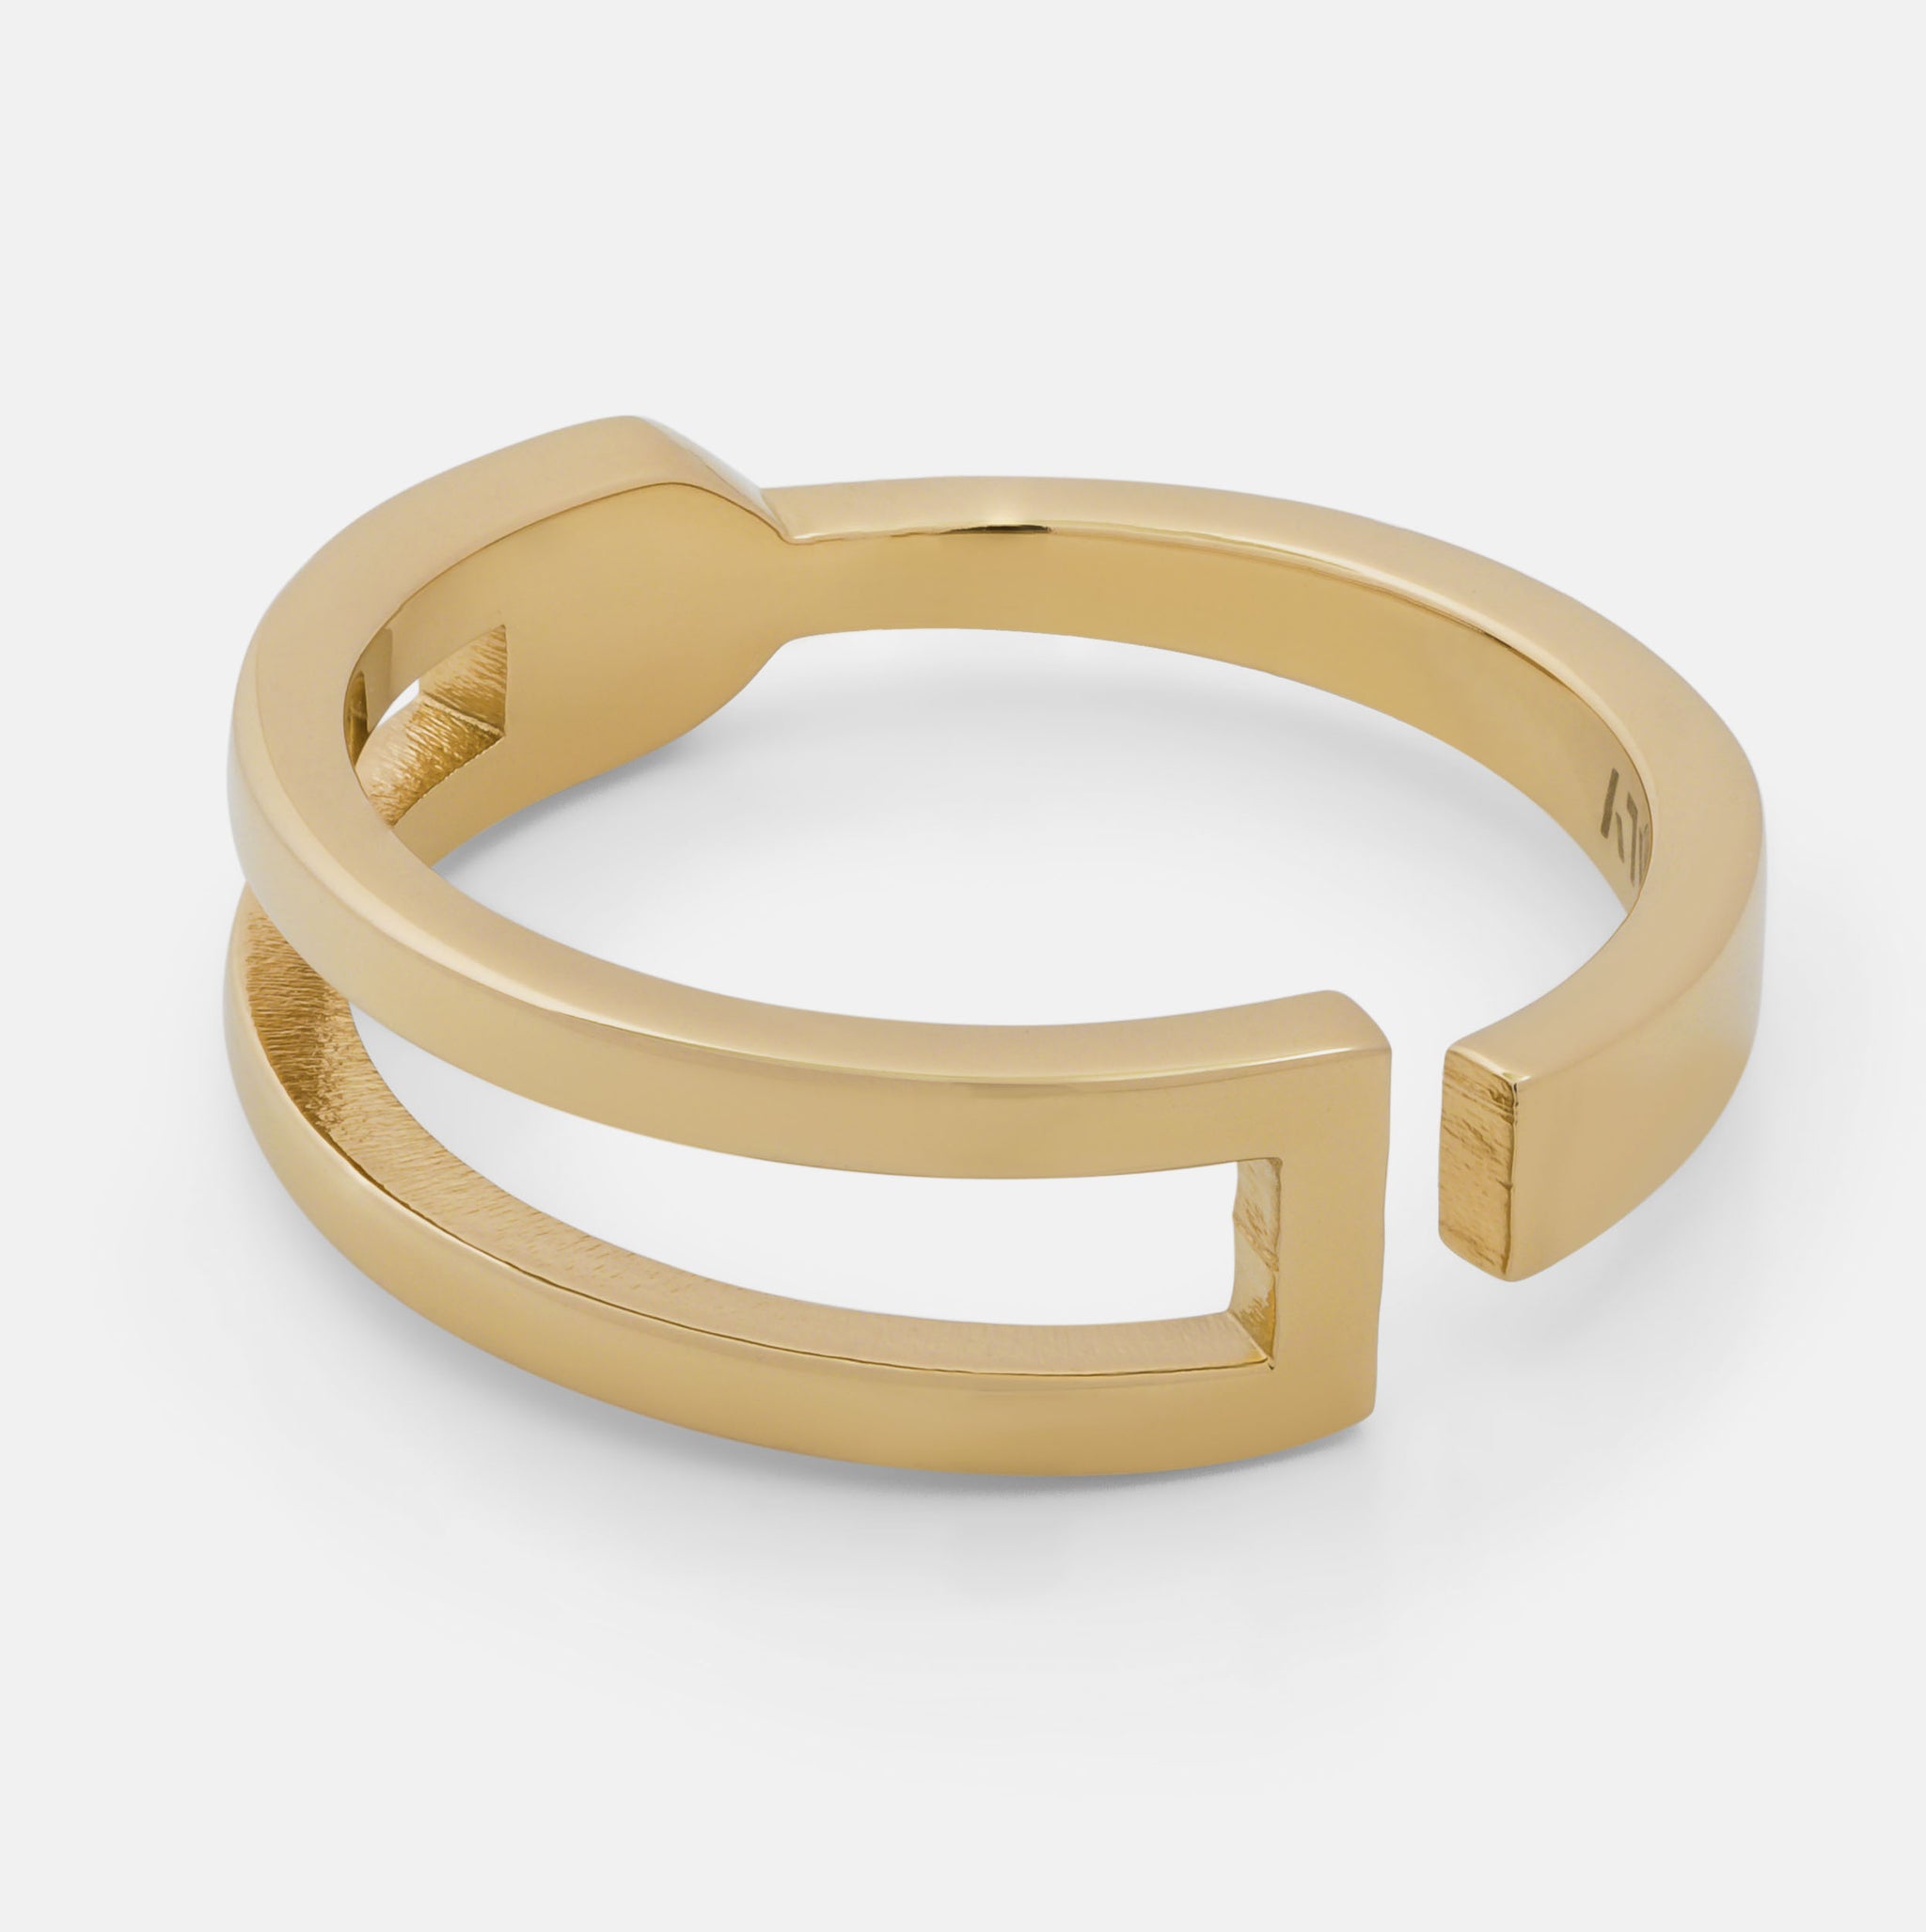 Vitaly Tangent Ring | 100% Recycled Stainless Steel Accessories